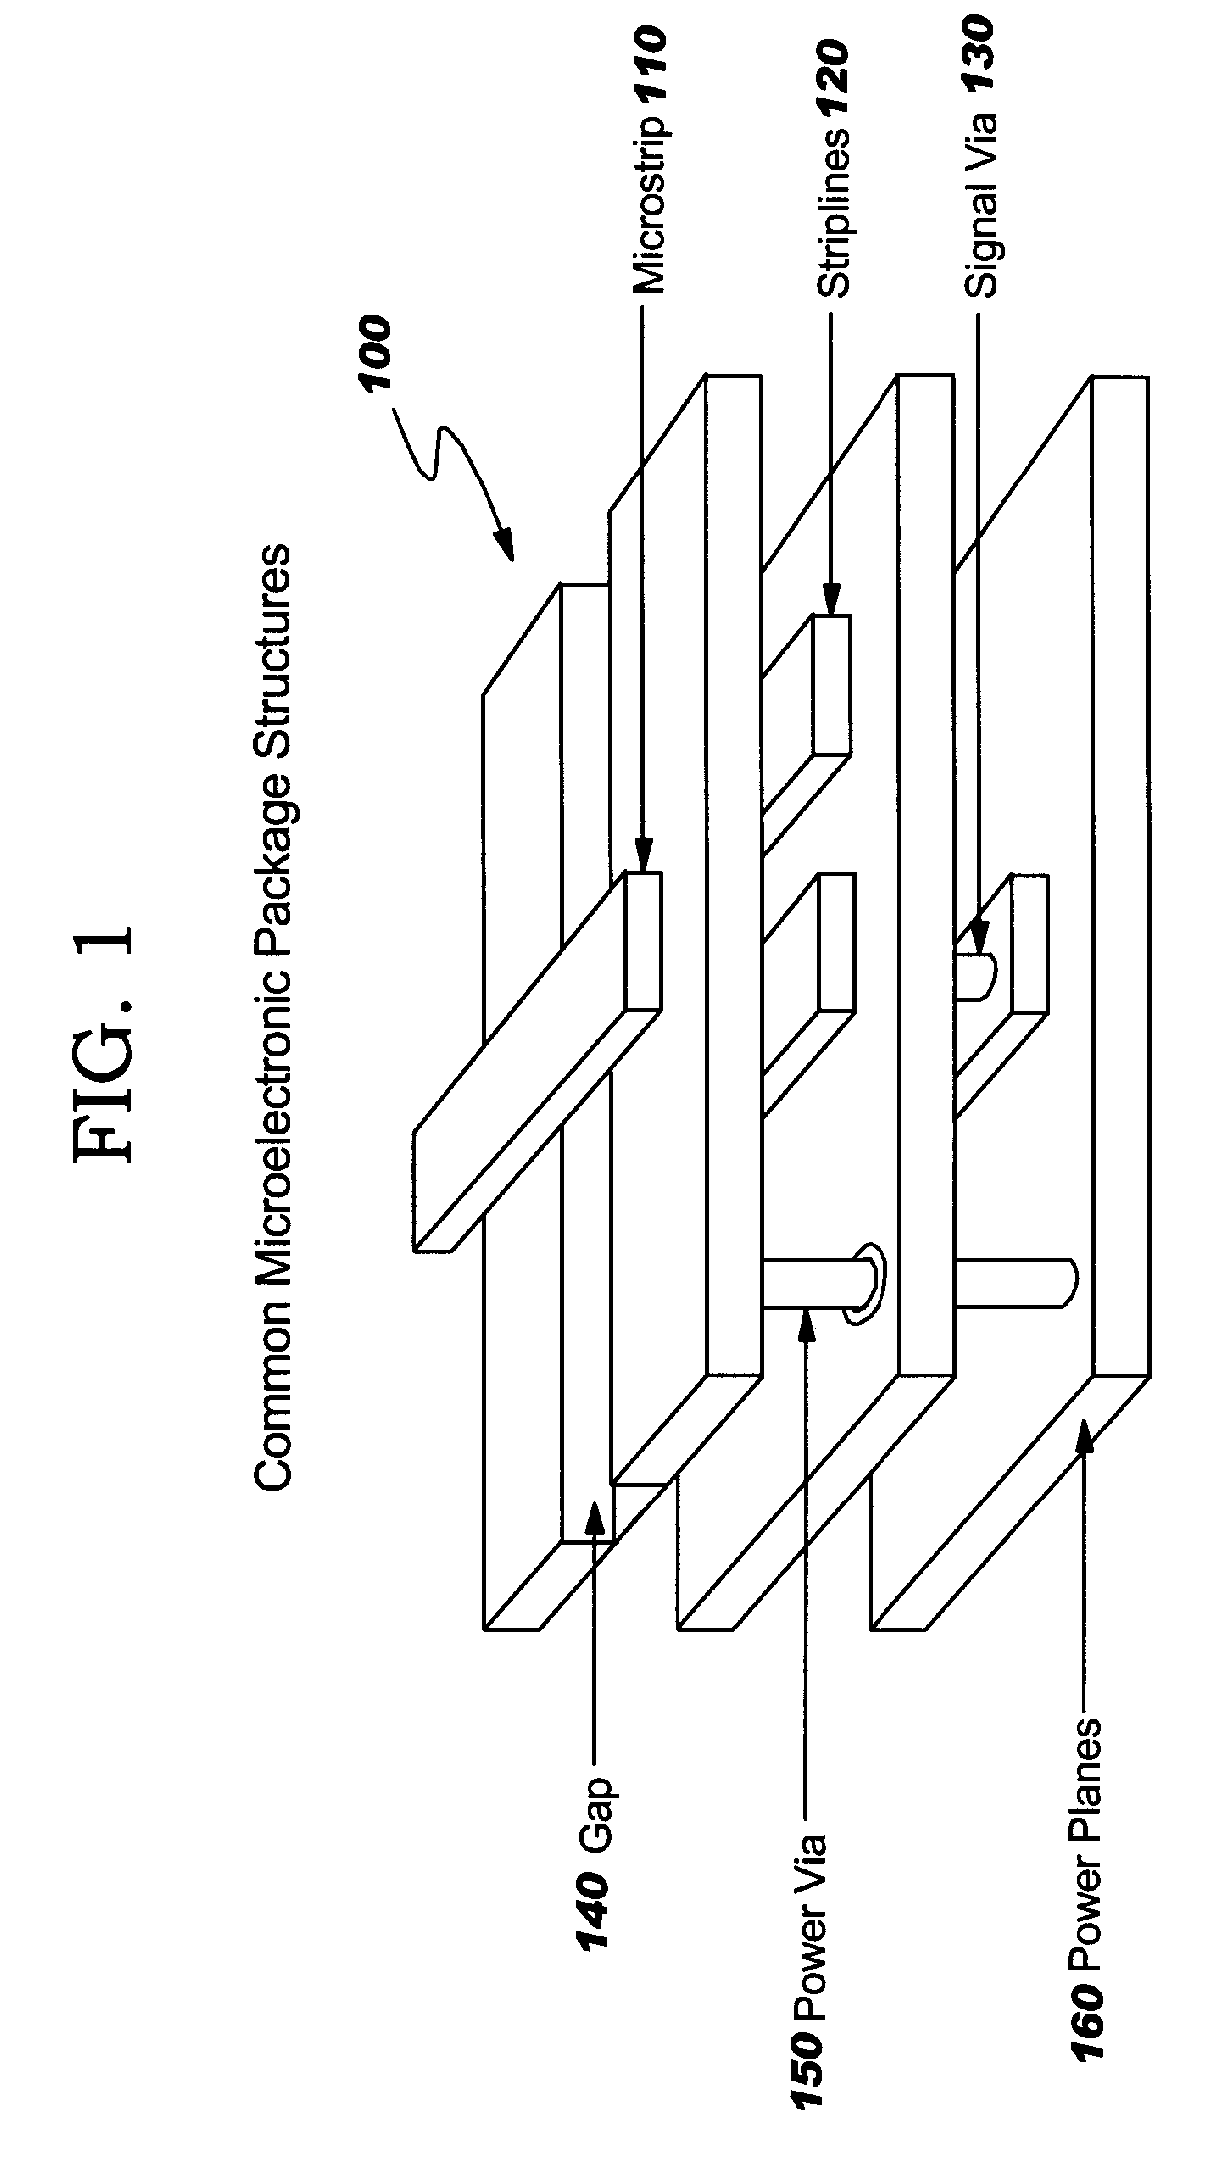 Hierarchical method of power supply noise and signal integrity analysis